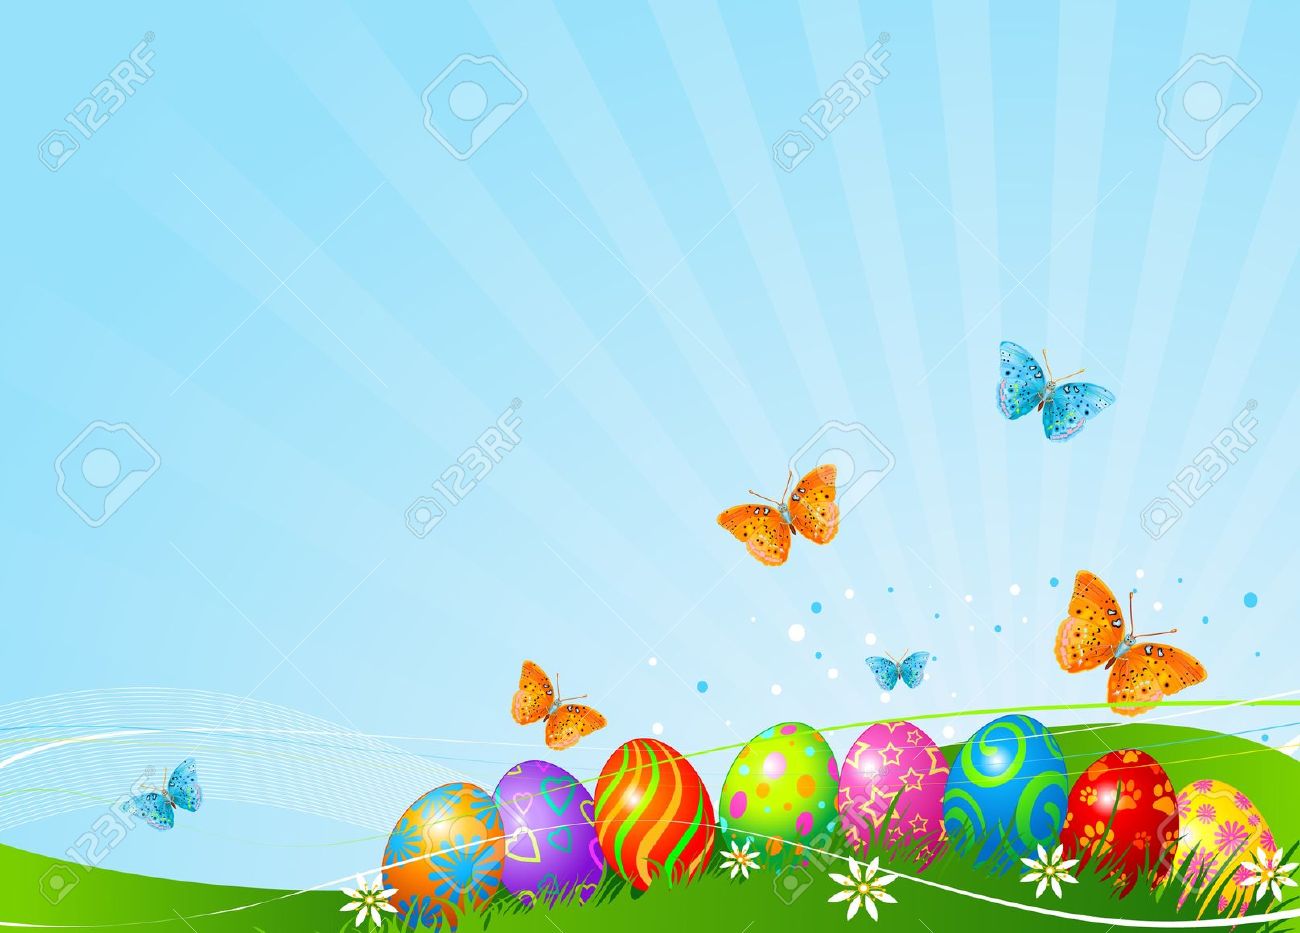 easter clip art backgrounds free - photo #12